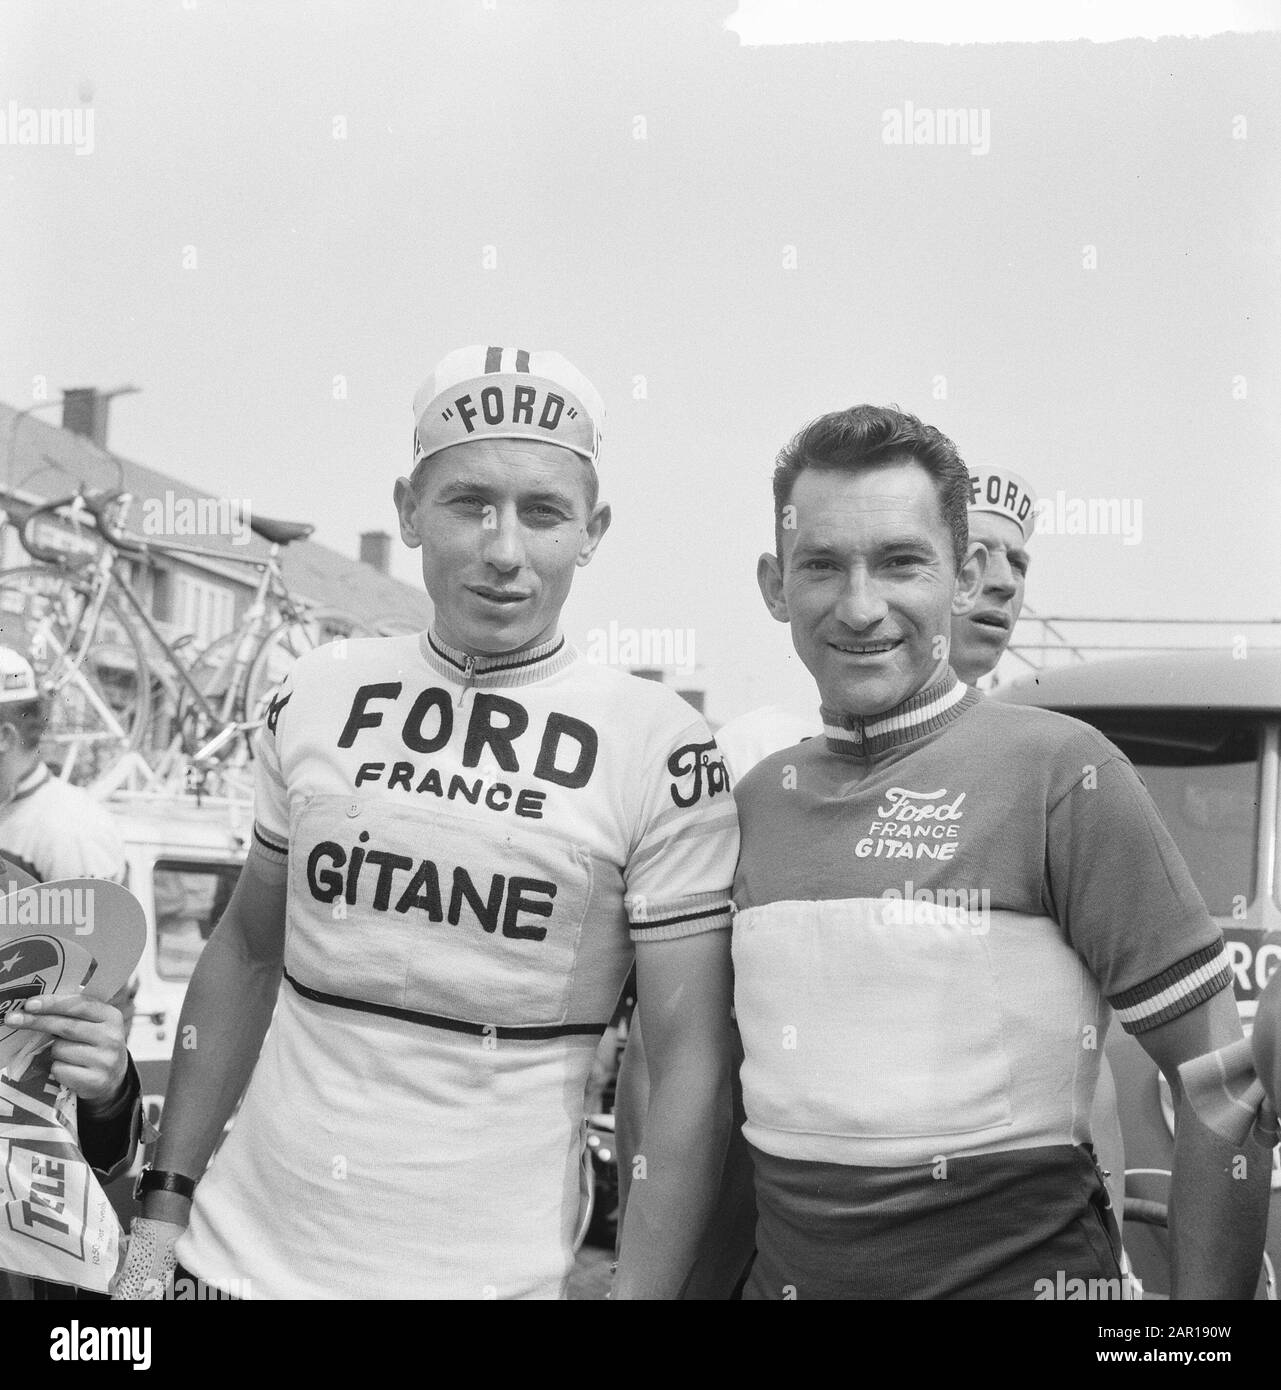 Tour of the Netherlands, start at Amstelveen, Jacques Anquetil (left) and Jean Stablinski Date: May 12, 1965 Location: Amstelveen, Noord-Holland Keywords: sport, cycling Personal name: Anquetil Jacques, Stablinski Jean Institution name: Ronde van Nederland Stock Photo